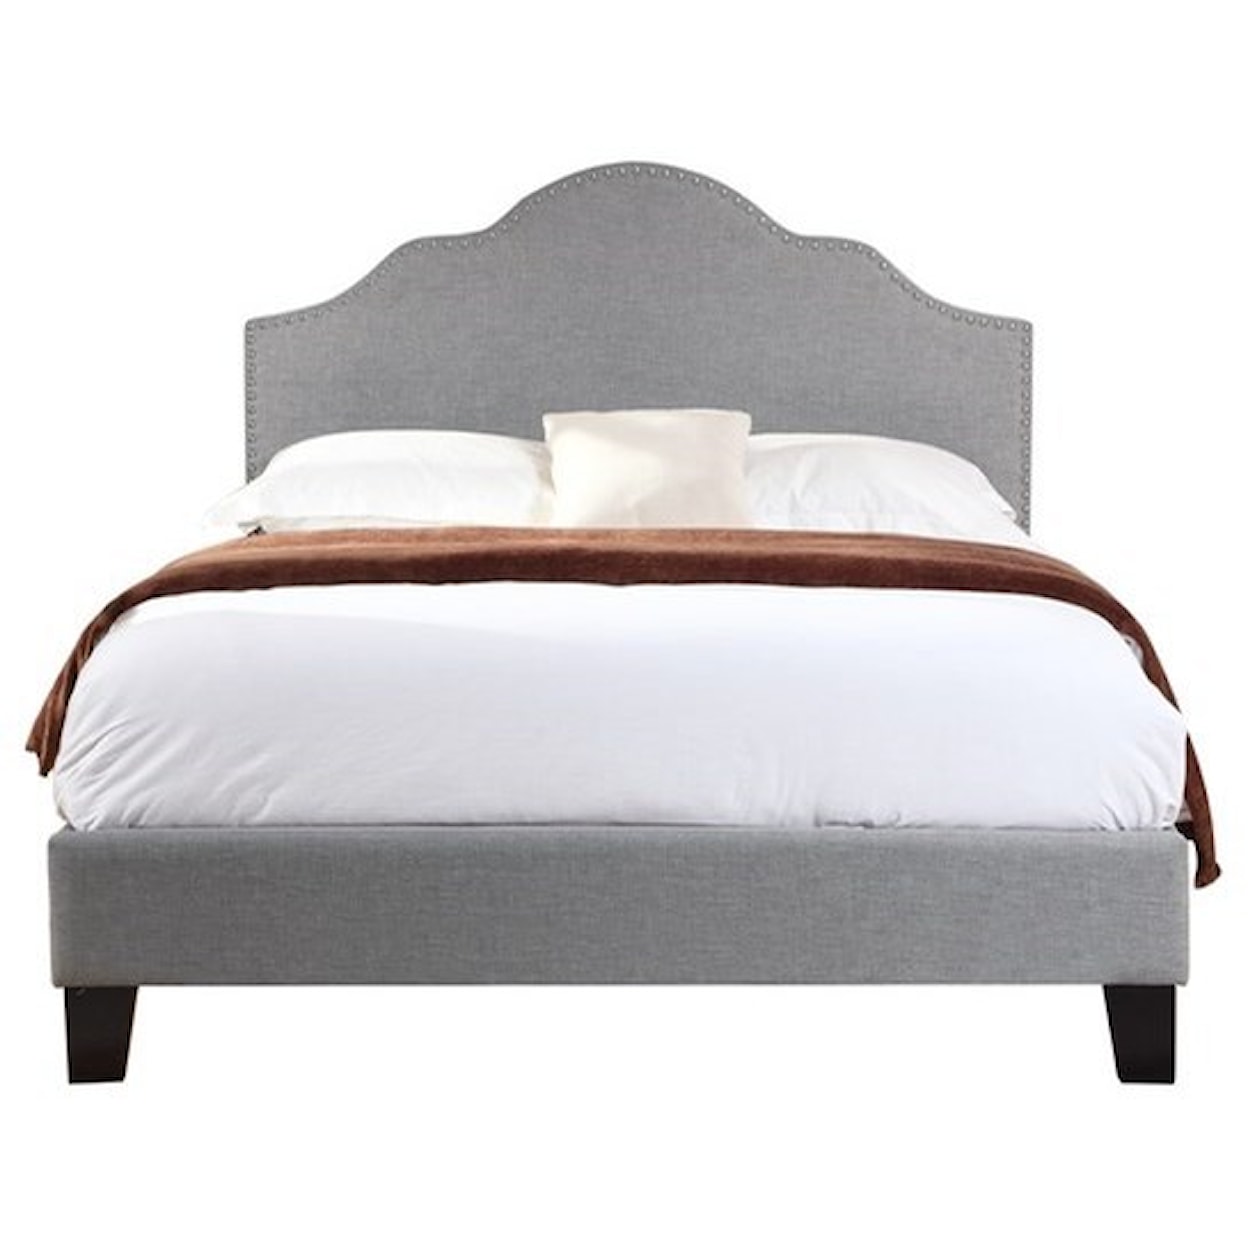 Emerald Madison Cal King Upholstered Bed